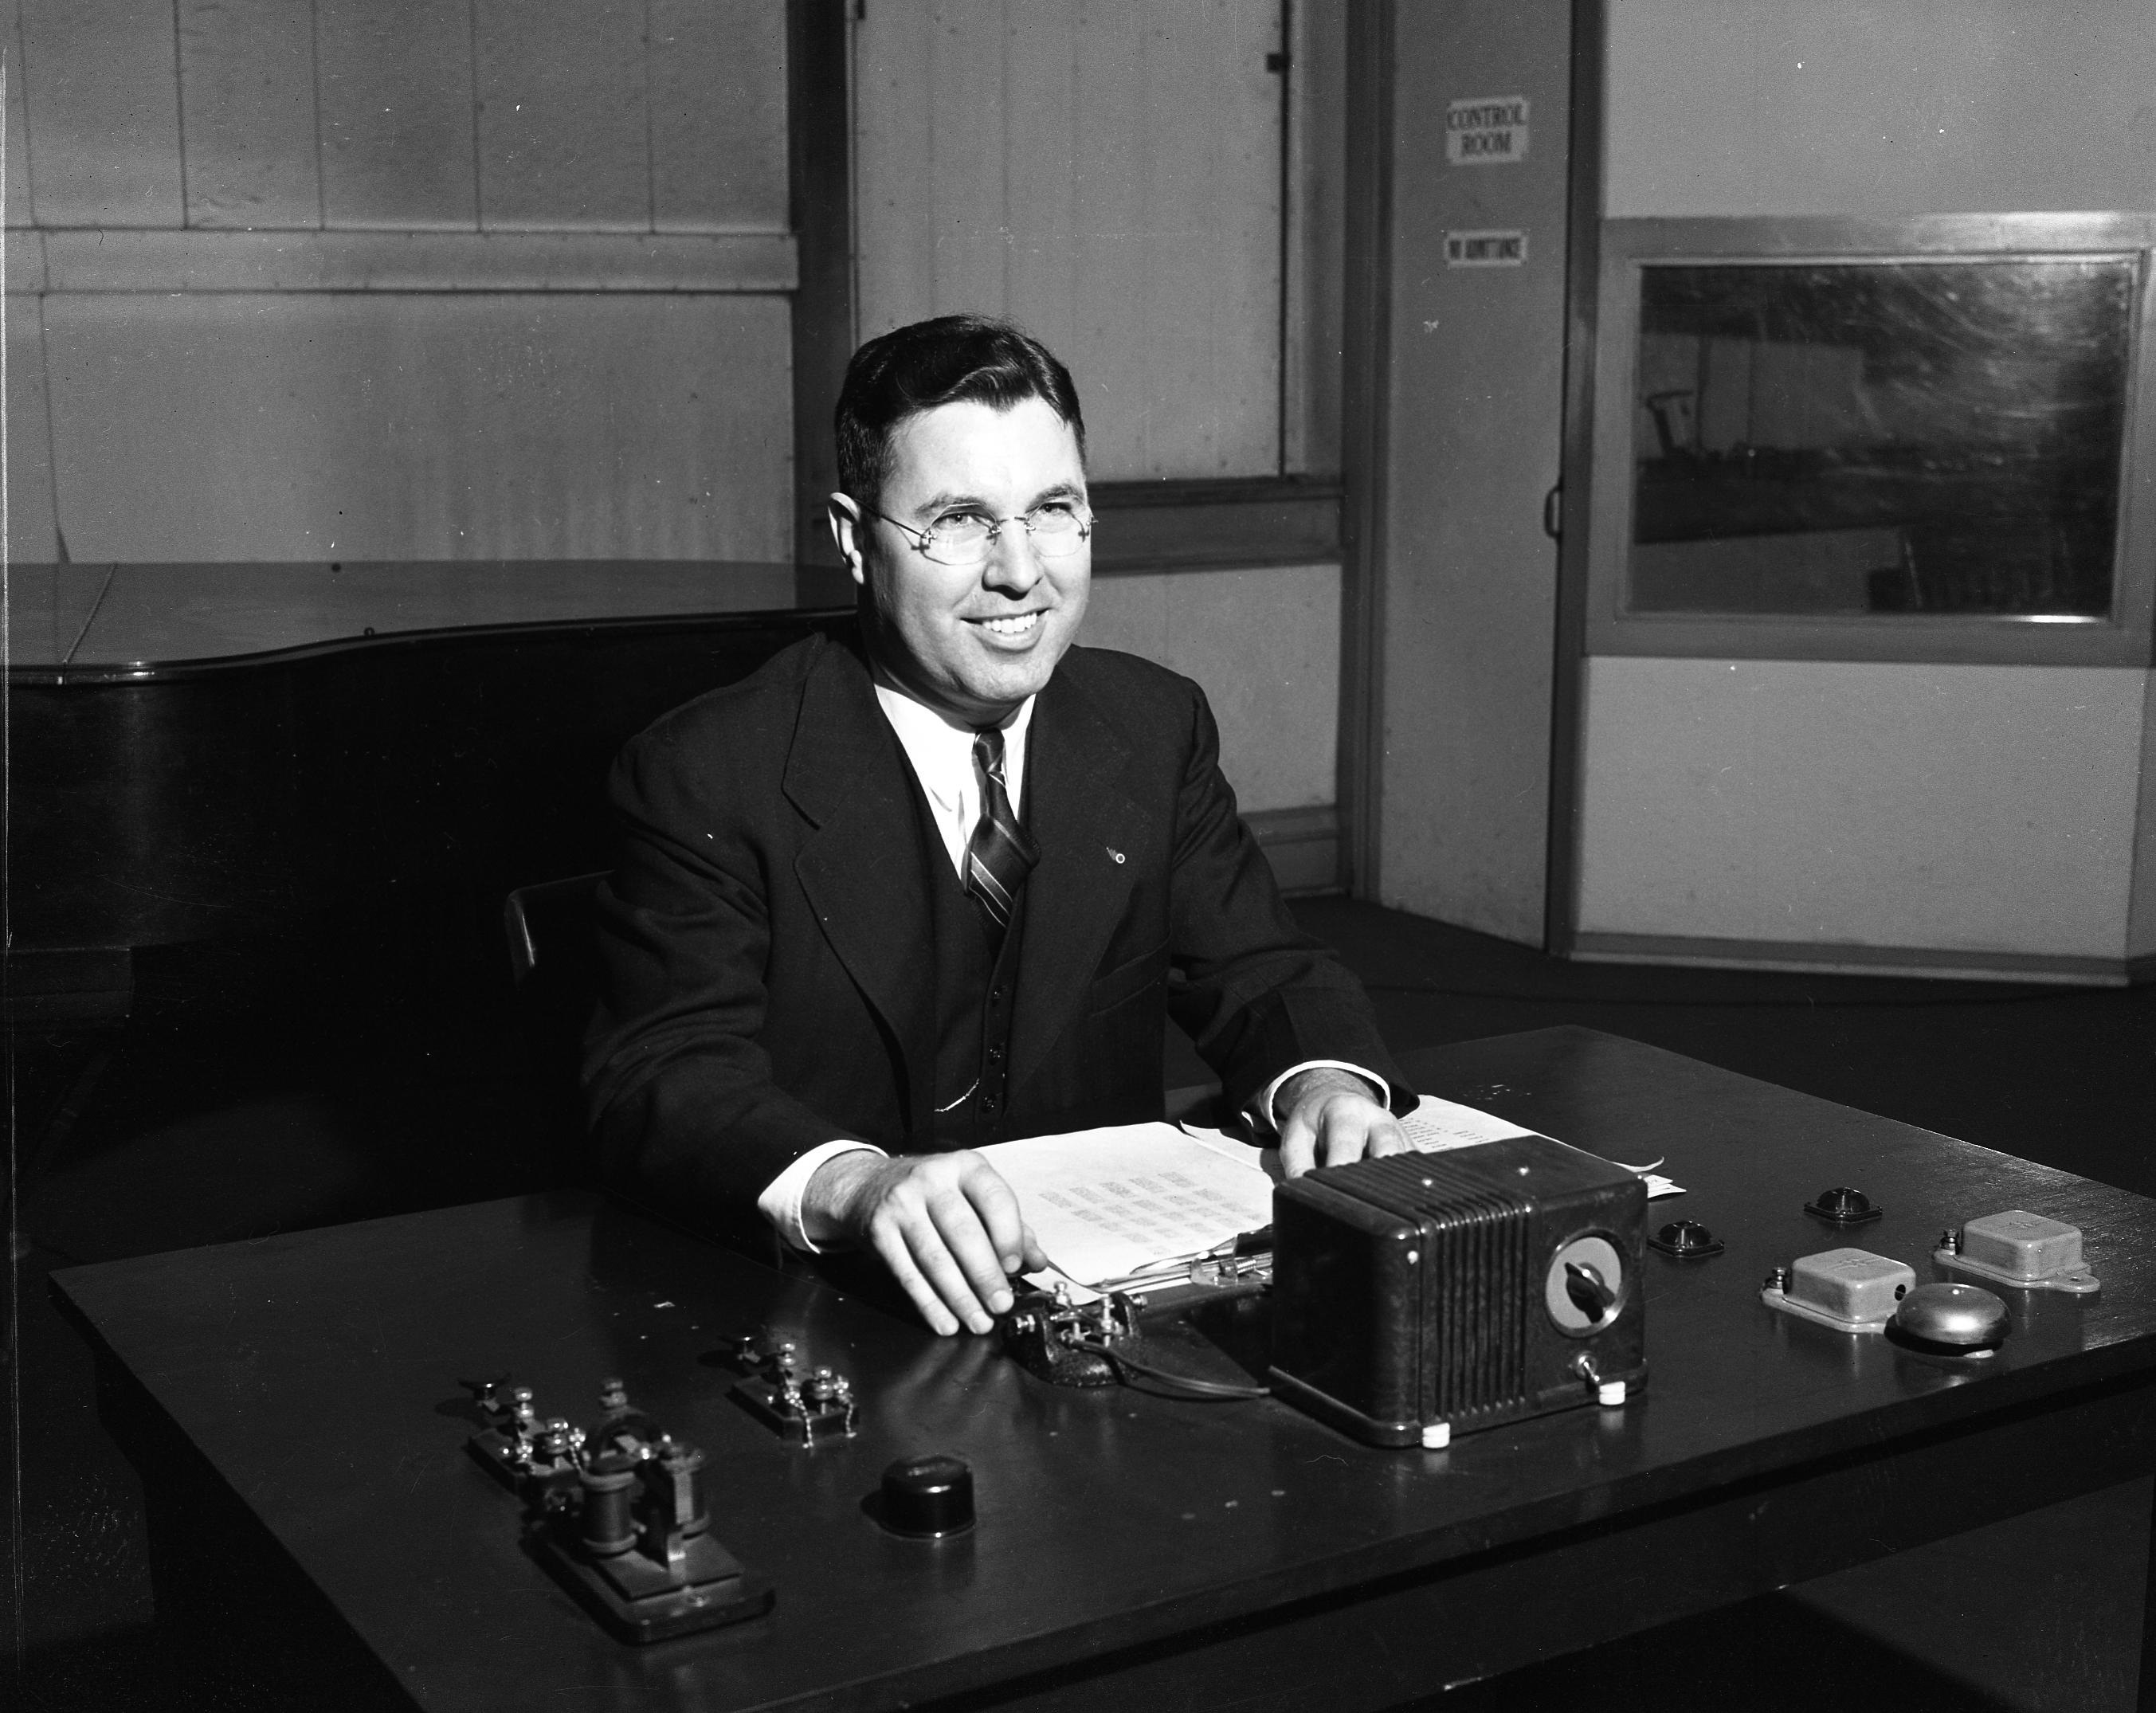 (Photograph of Dr. Clarence M. Morgan ca. 1943 used with permission of Indiana State University Archives)